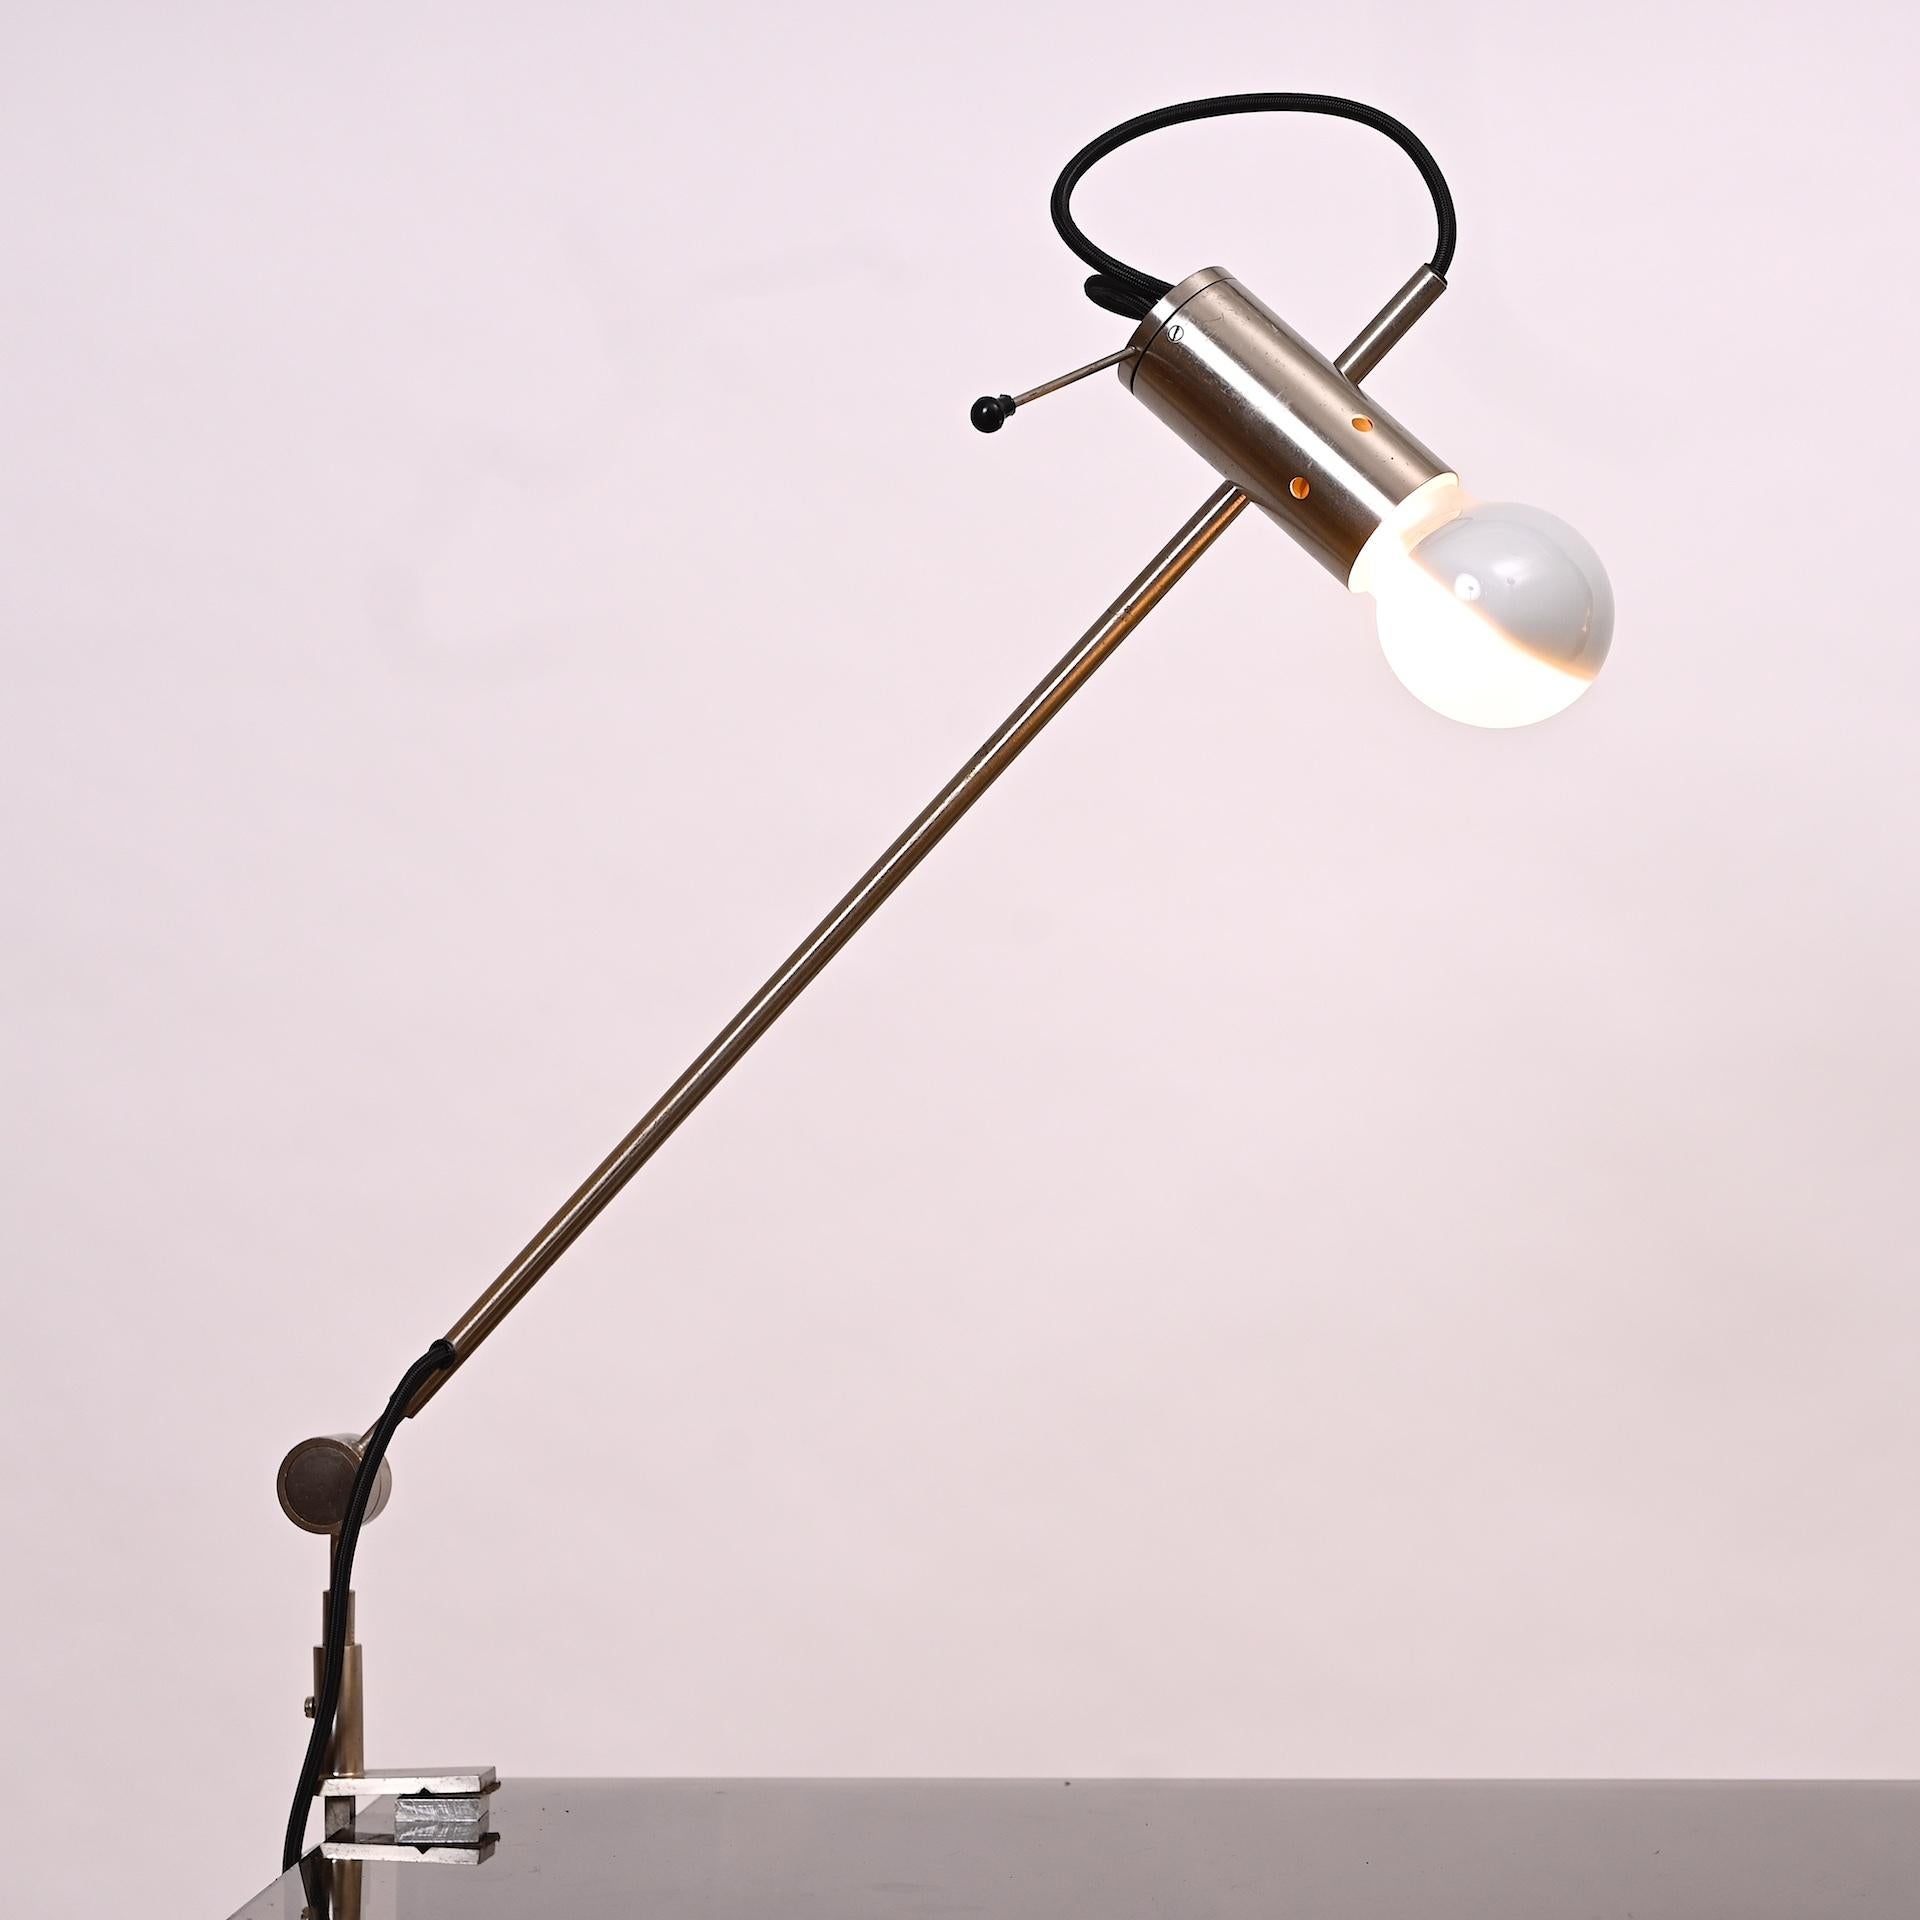 Tito Agnoli for Oluce. Italy 1954

Articulated, adjustable clamp light

Perfect minimal design. Light can be angled in any direction.

Model 255

Re wired for US and Europe.